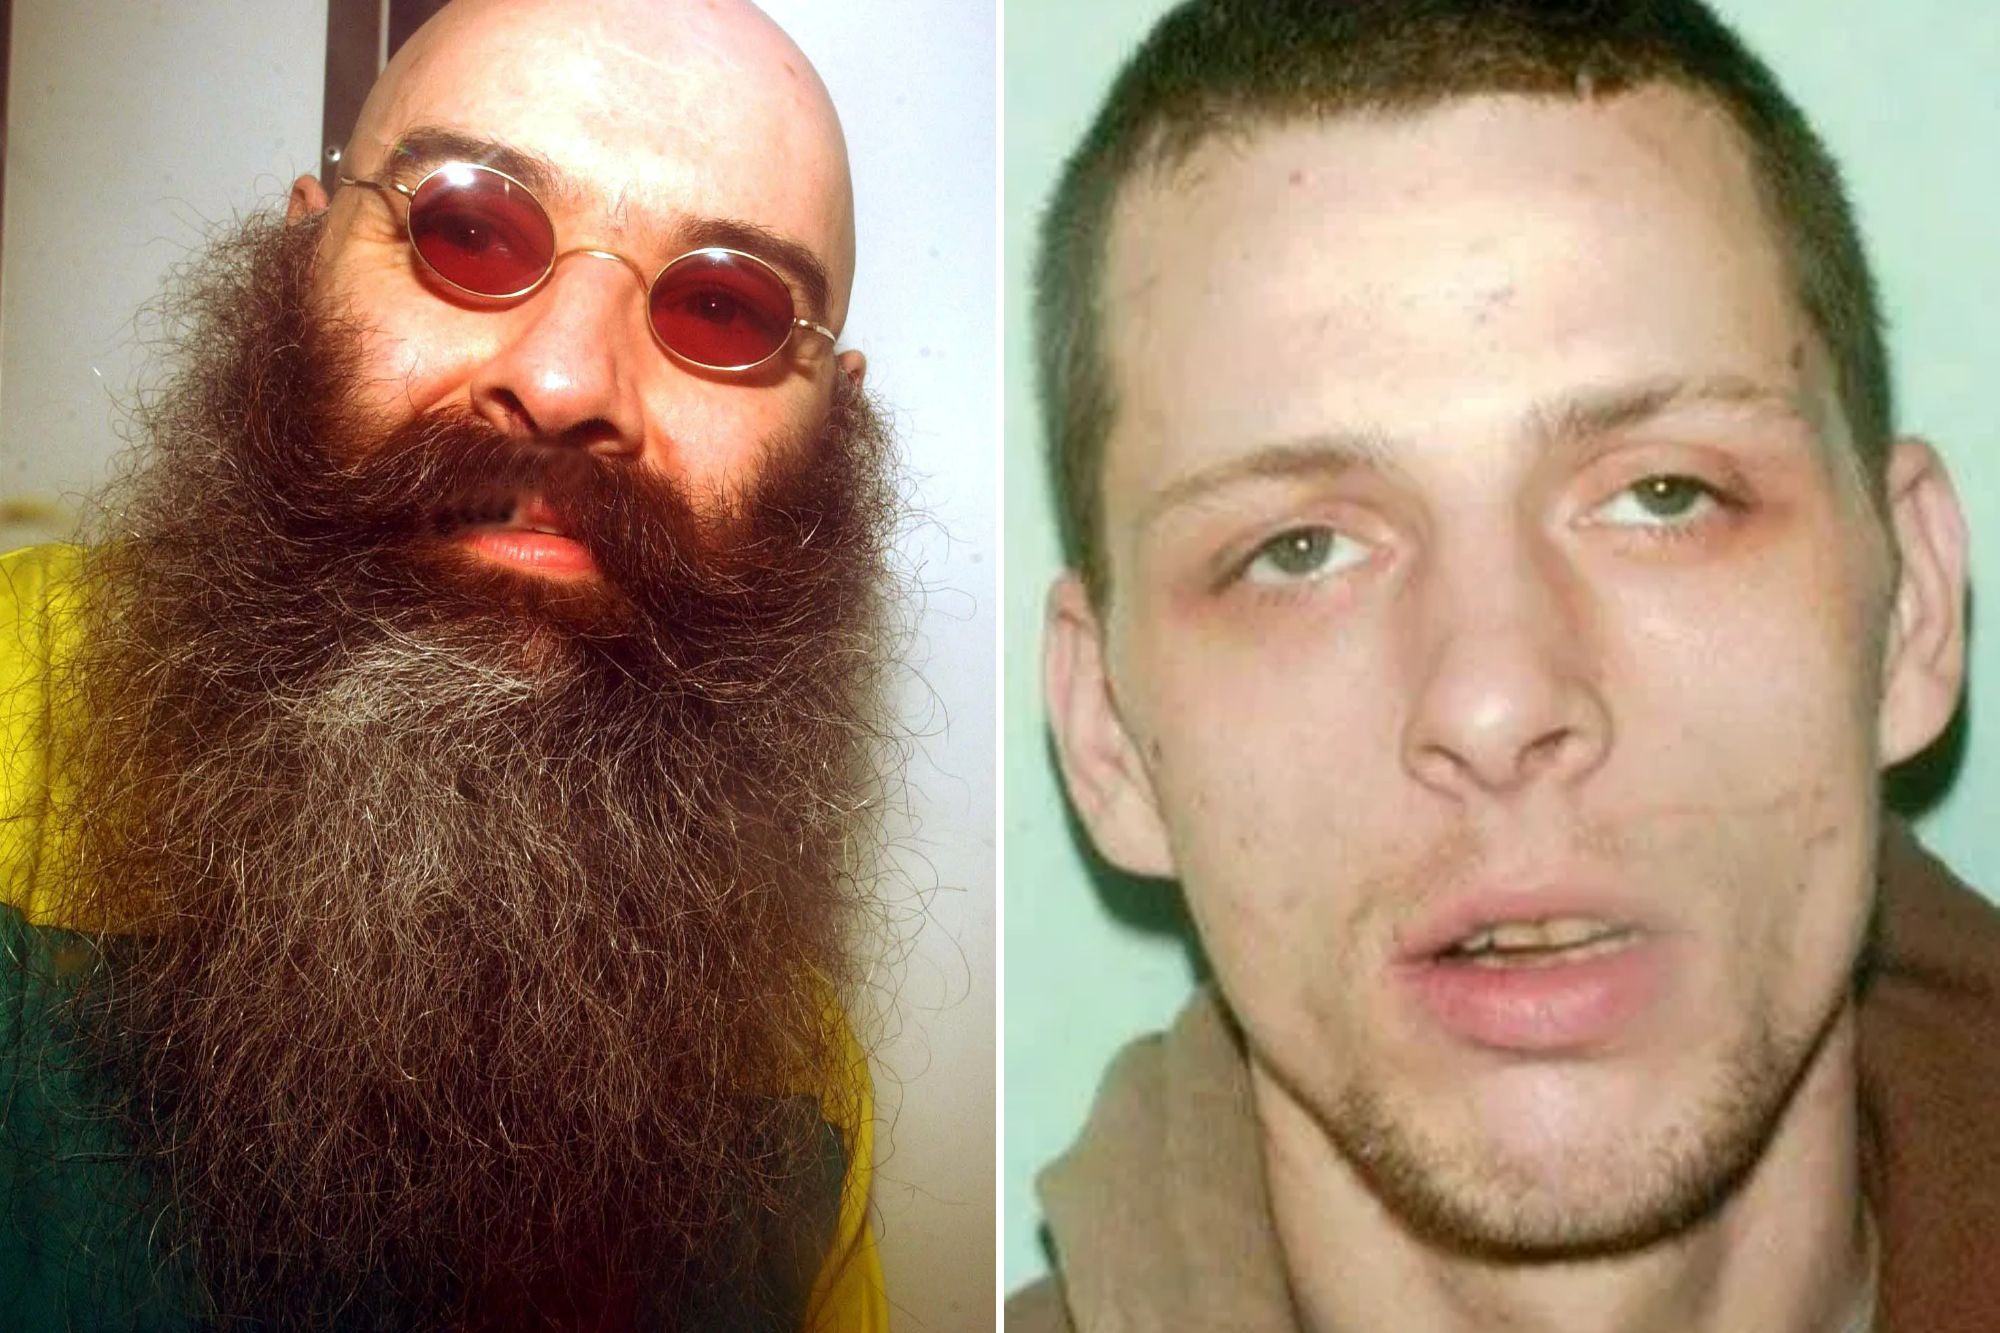 UK's most notorious lag Charles Bronson 'batters murderer who charged at him'